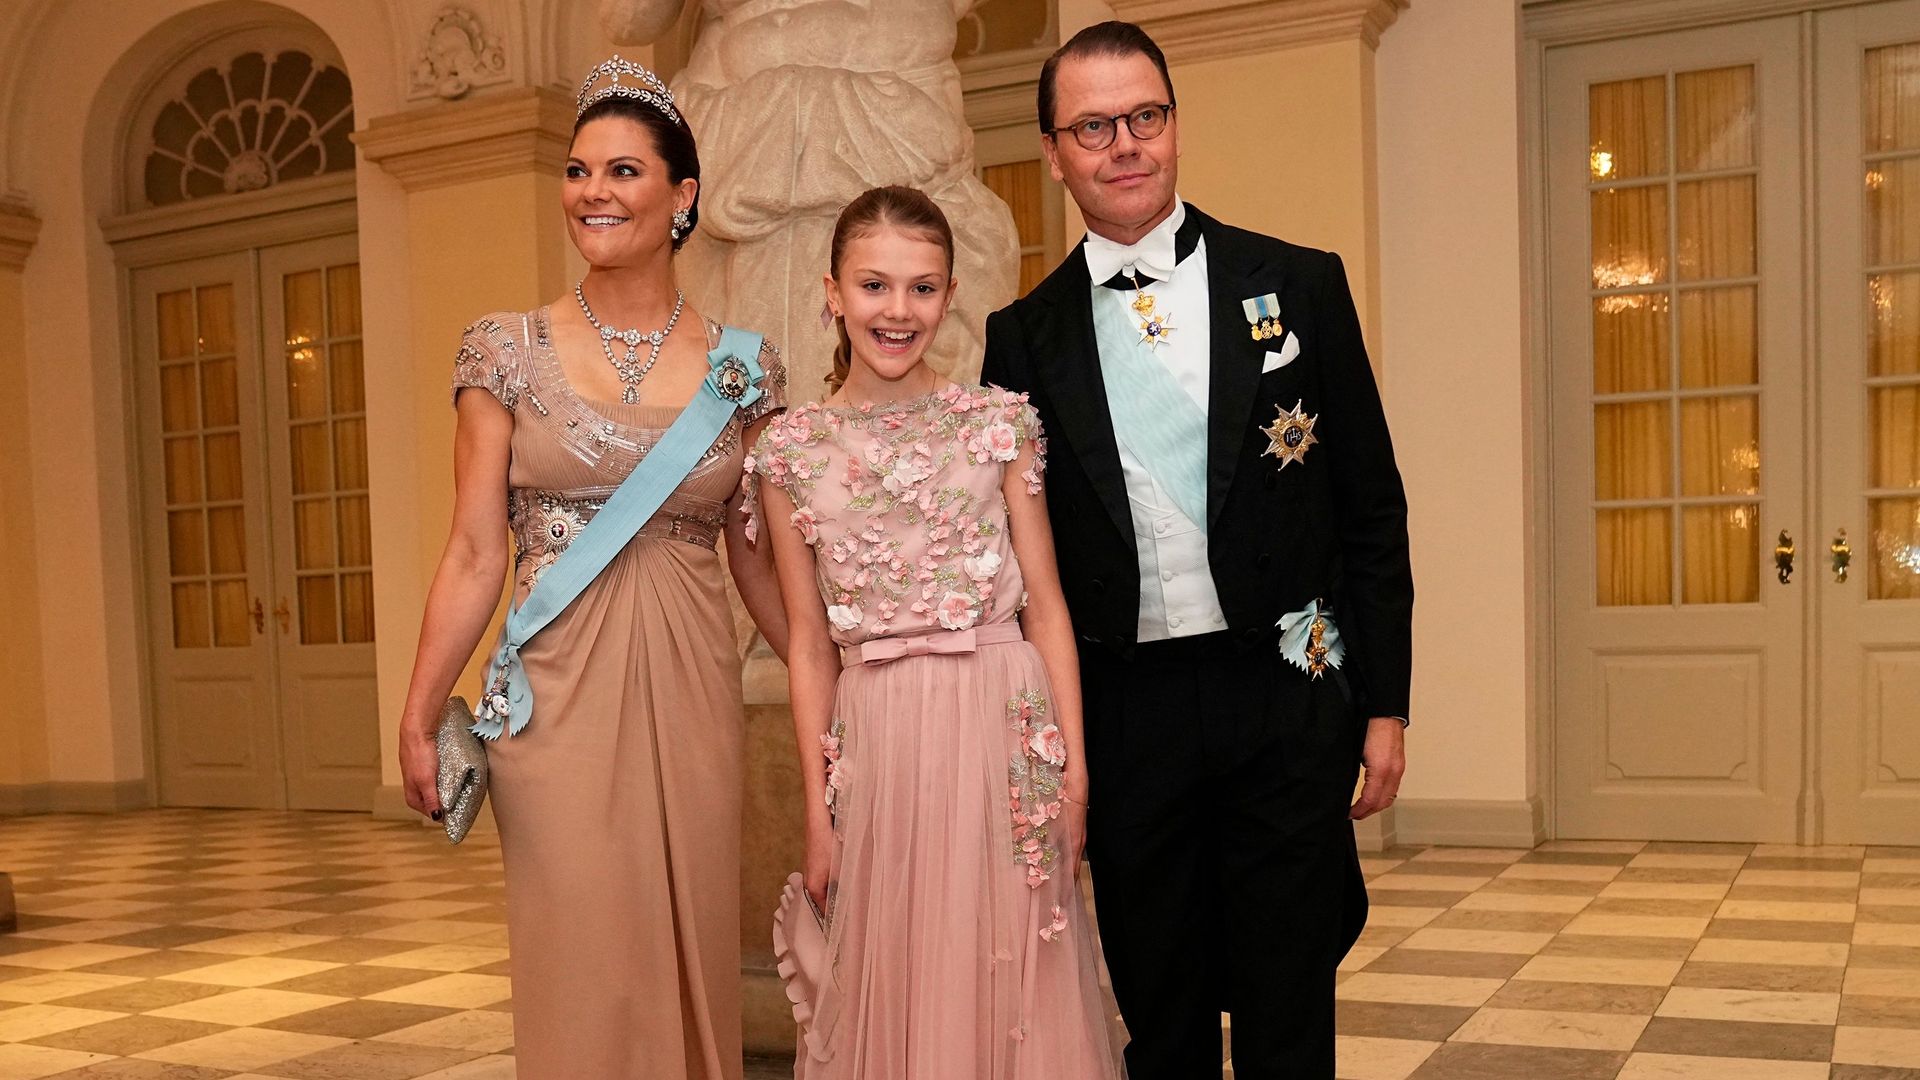 Sweden's Crown Princess Victoria, Prince Daniel and Princess Estelle at the celebration for Prince Christian's 18th birthday 